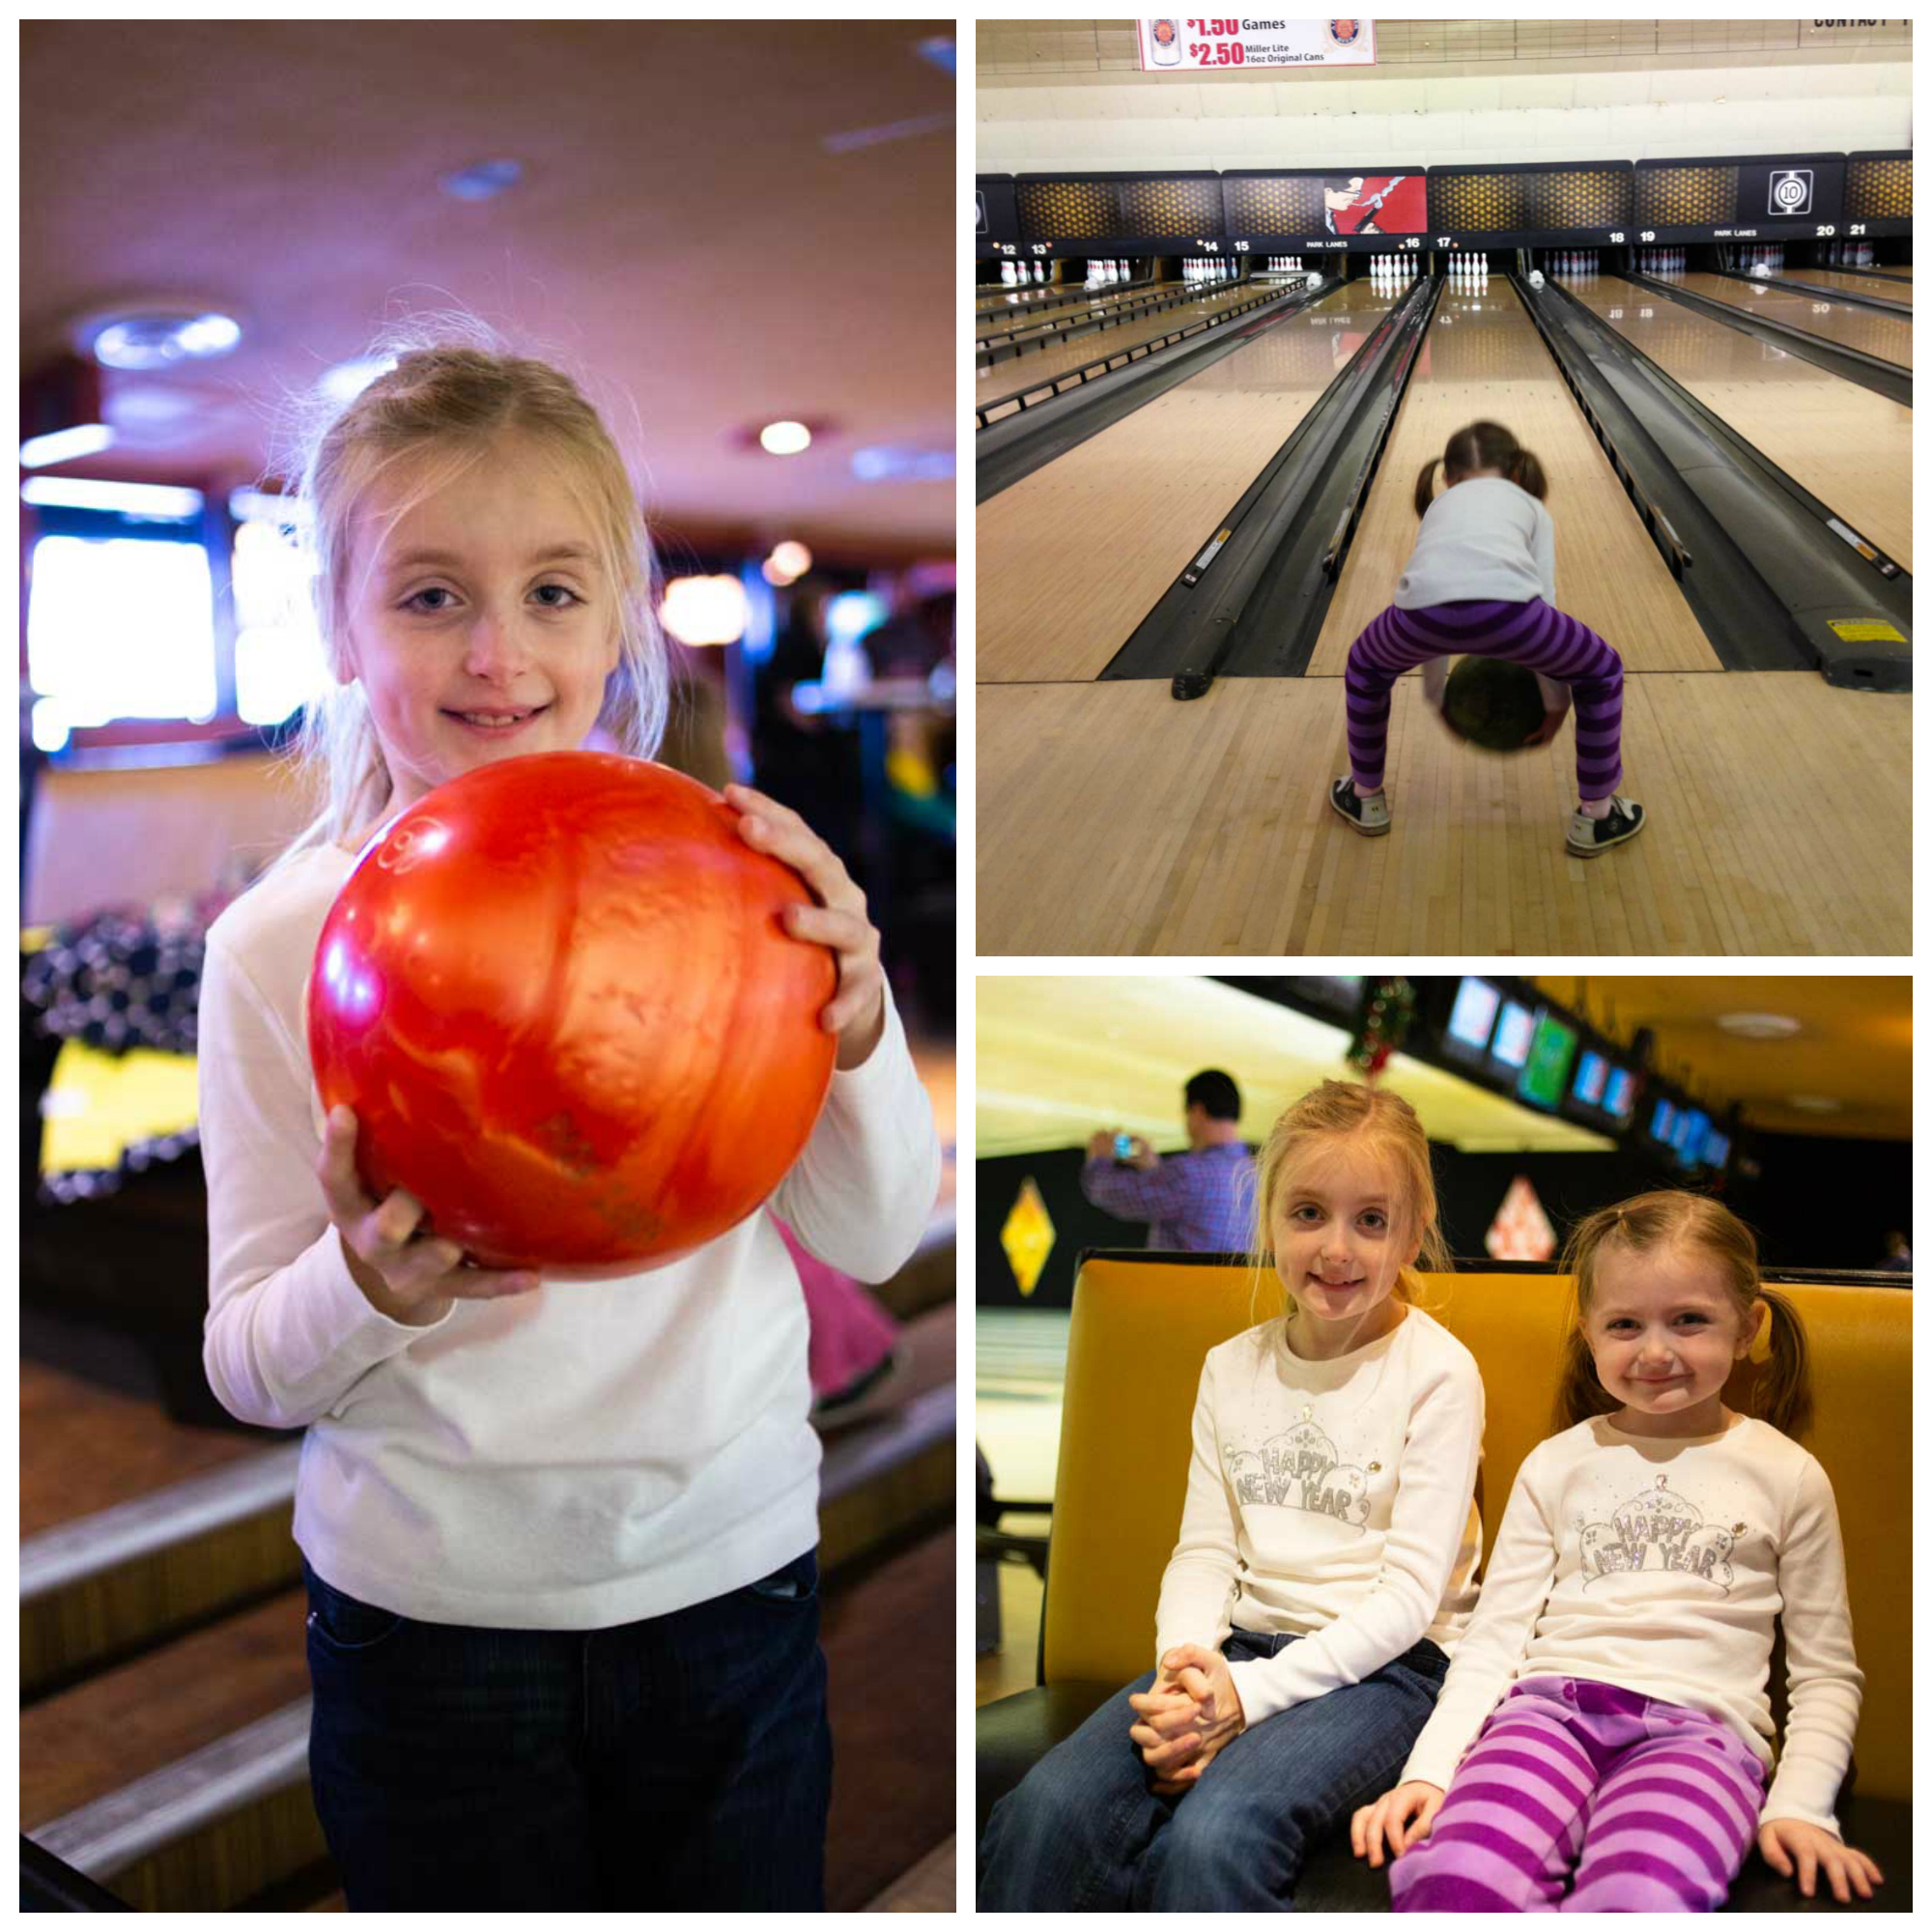 Park Lanes Bowling Alley is the perfect place to take kids for their first bowling games. Great for ages 3 and up!